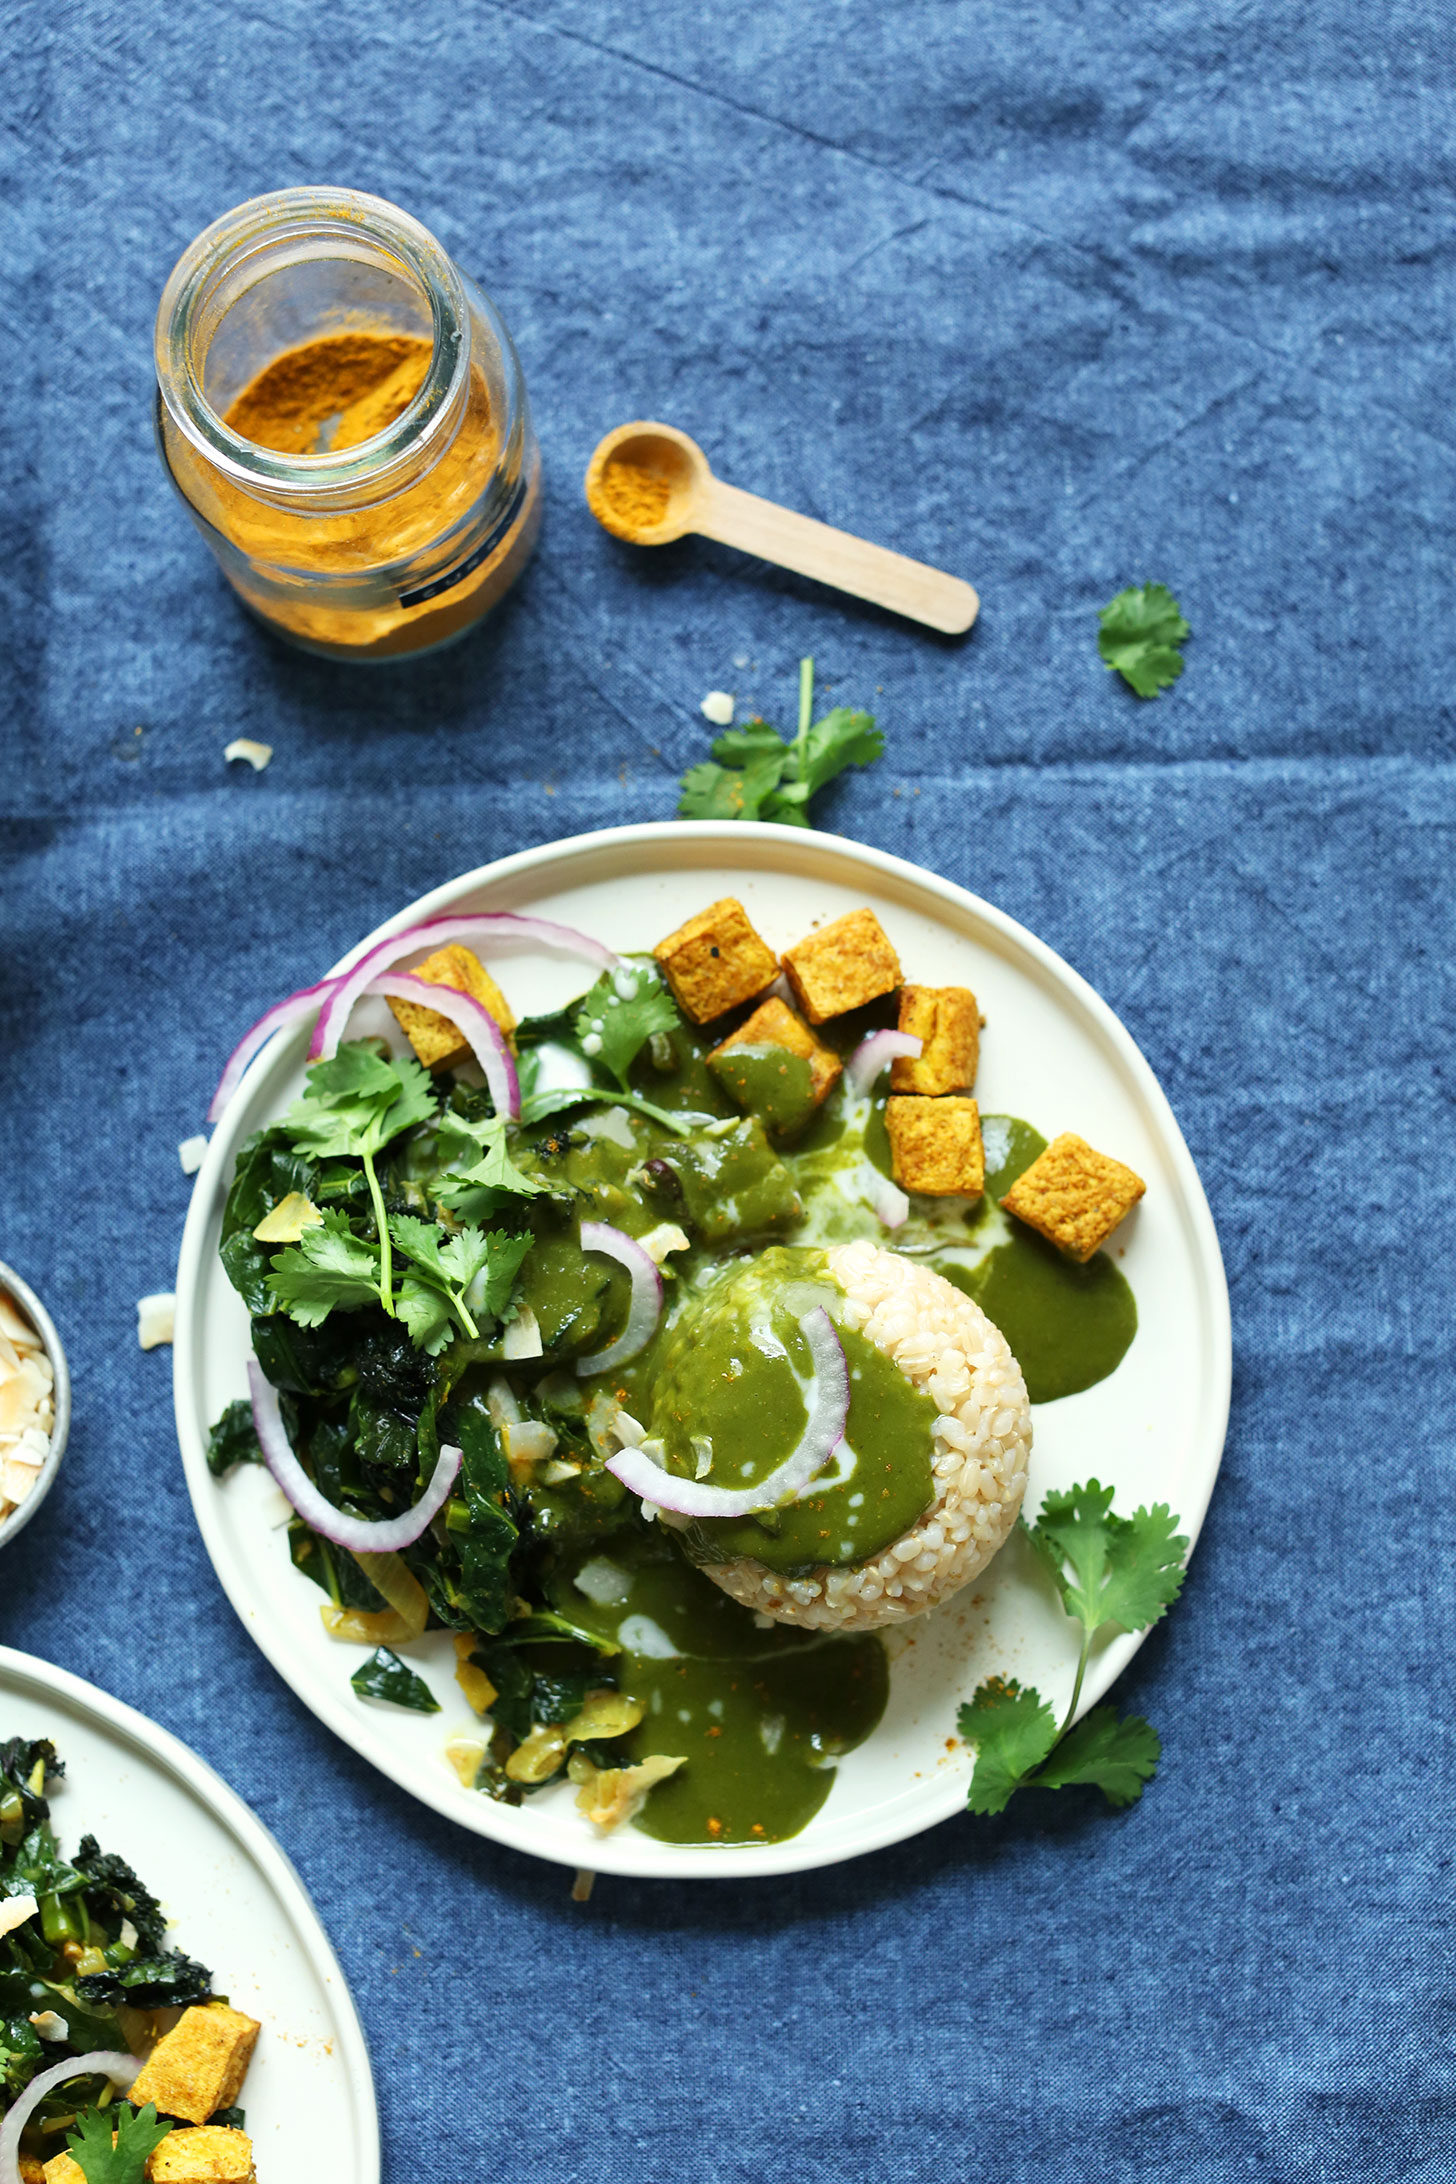 Amazing-vibrant-green-curry-with-tons-of-greens-serve-with-tofu-and-curried-kale-for-a-plantbased-meal-vegan-glutenfree-curry-recipe-minimalistbaker